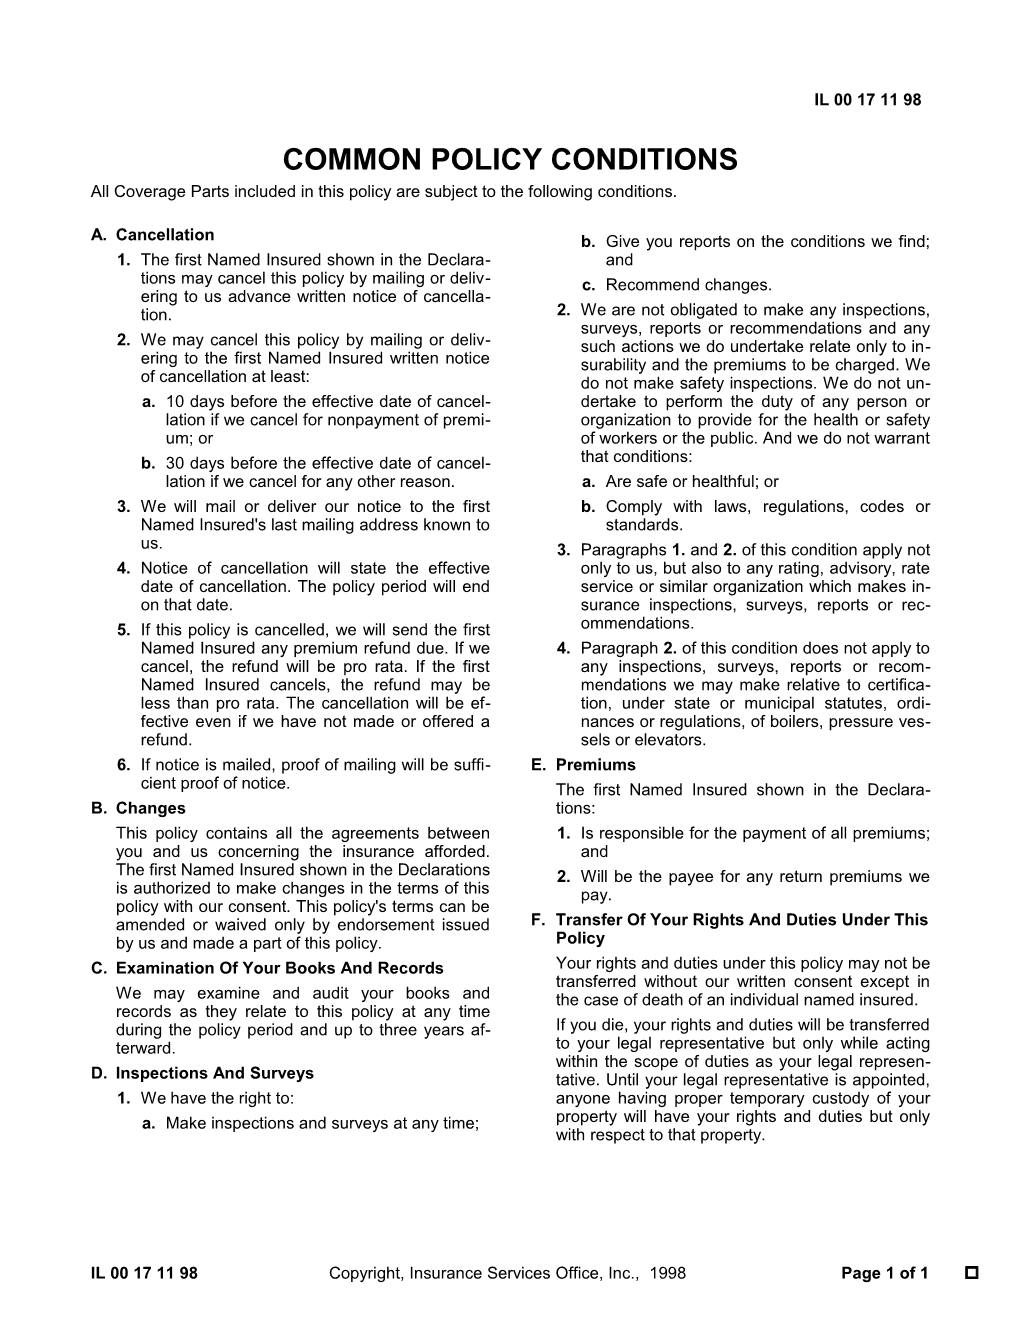 Common Policy Conditions